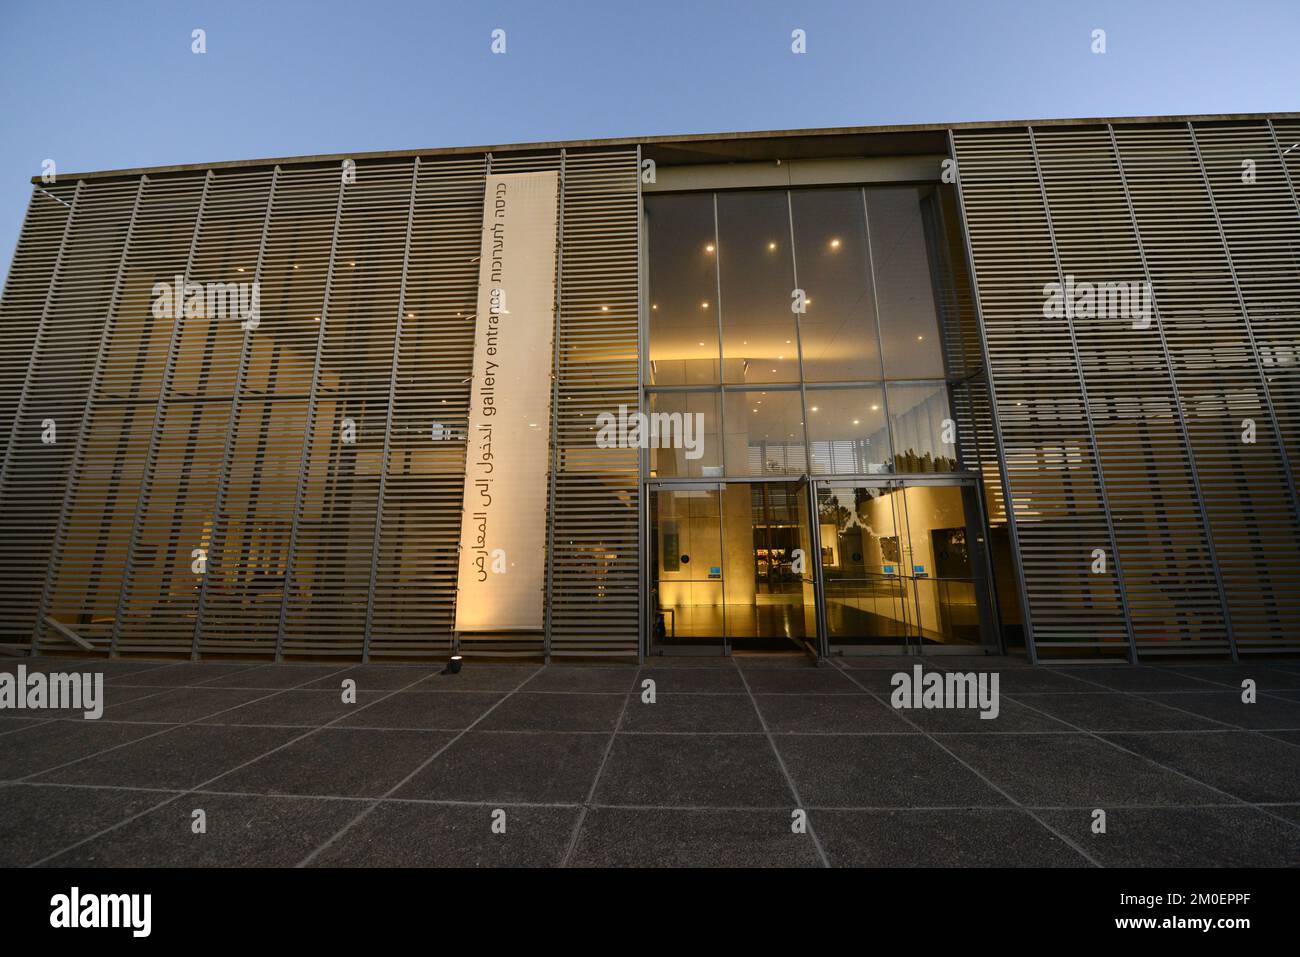 Gallery exhibit building at the Israel Museum in Givat Ram, Jerusalem, Israel. Stock Photo